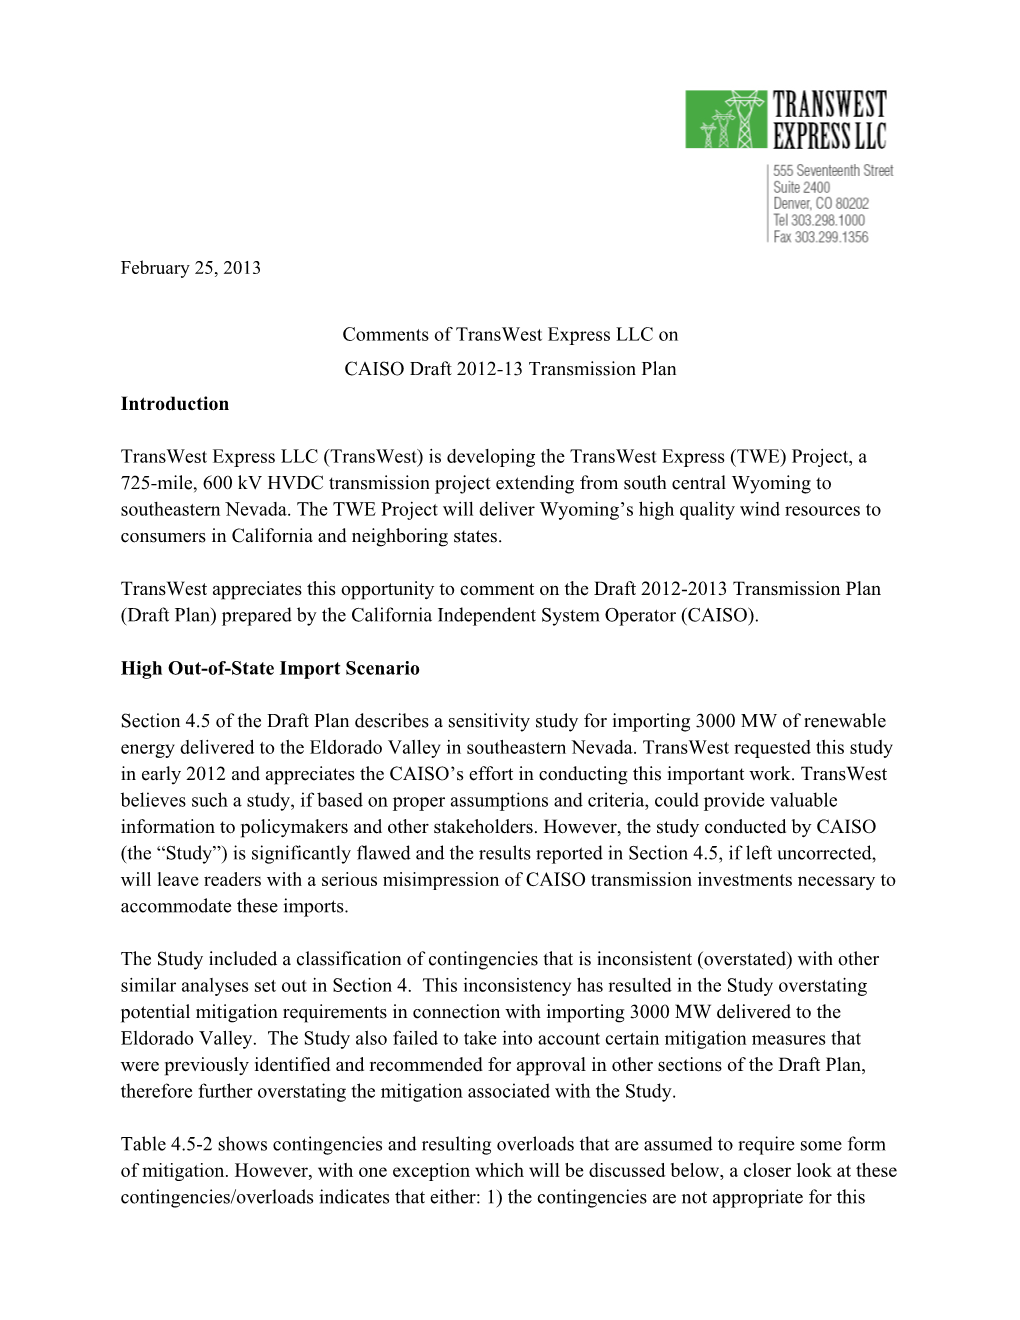 Transwest Express Comments on Draft 2012-2013